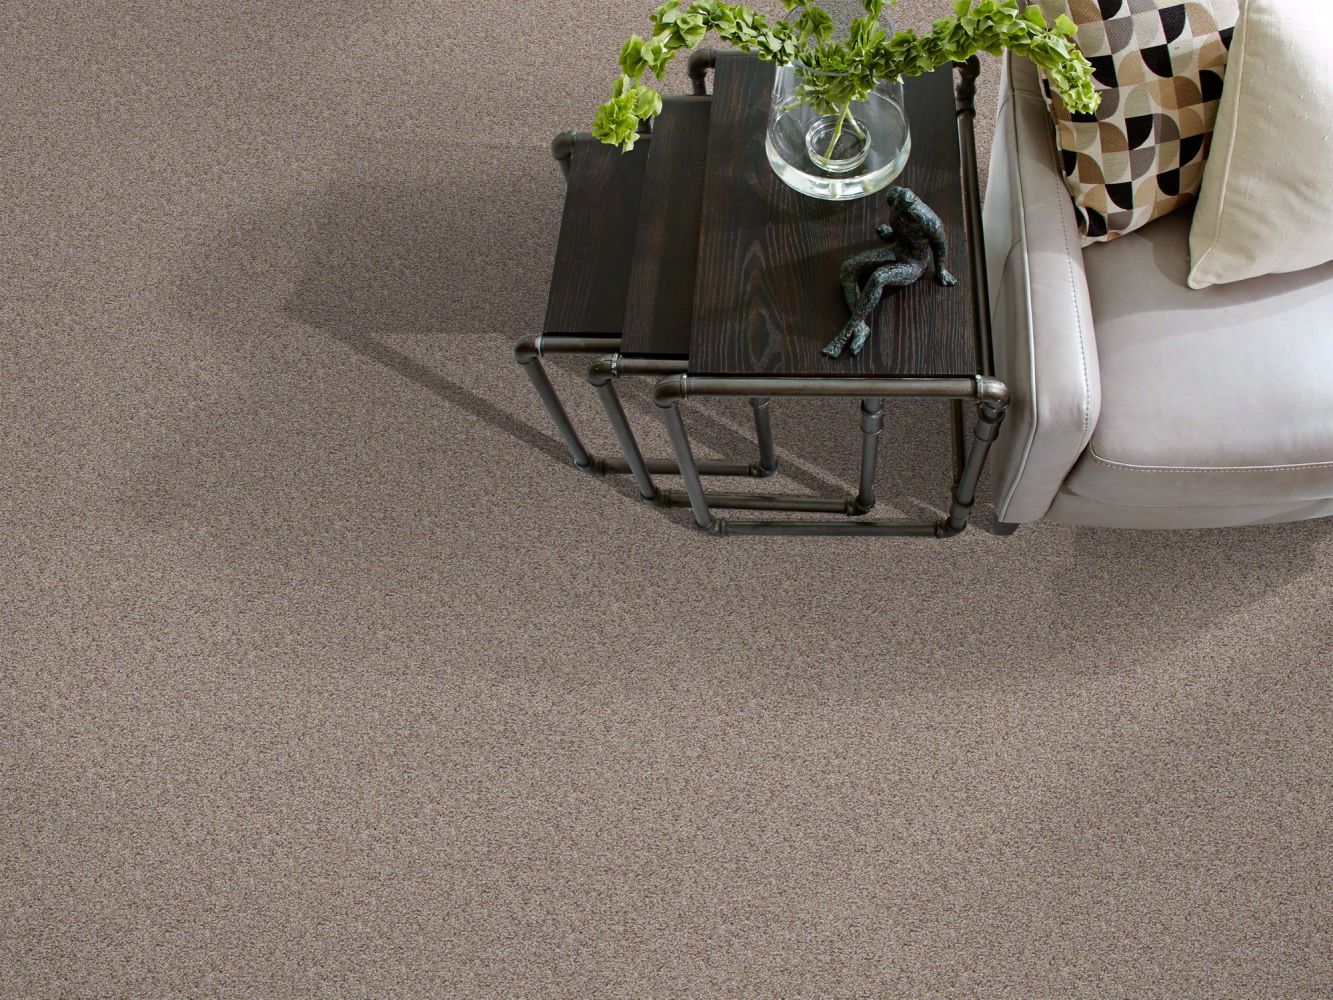 Shaw Floors Value Collections Take The Floor Tonal I Net Classique 00161_5E072